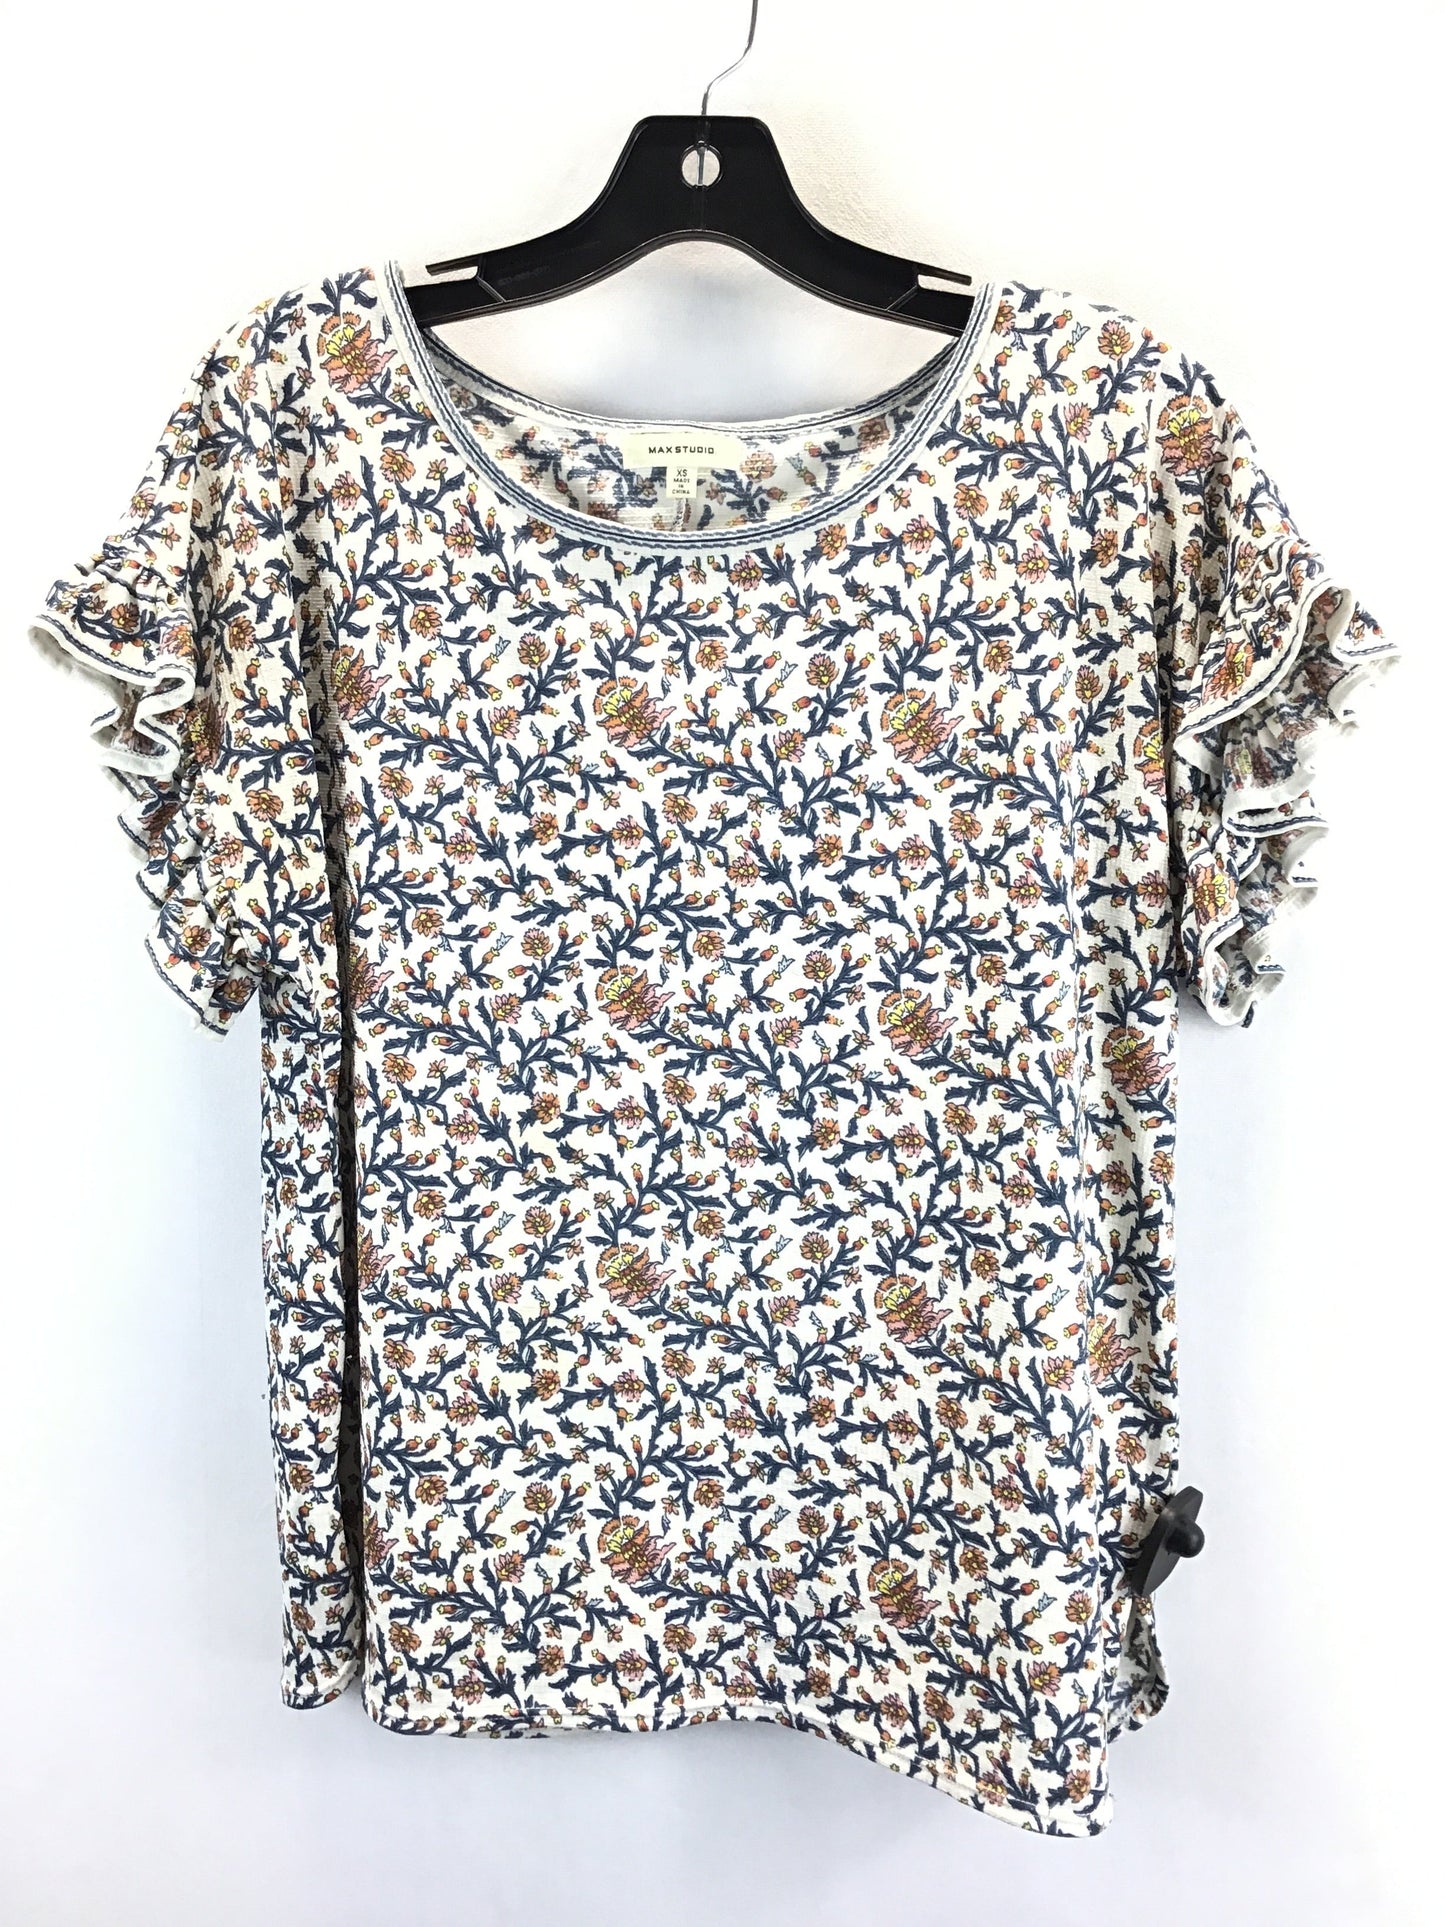 Floral Print Top Short Sleeve Max Studio, Size Xs